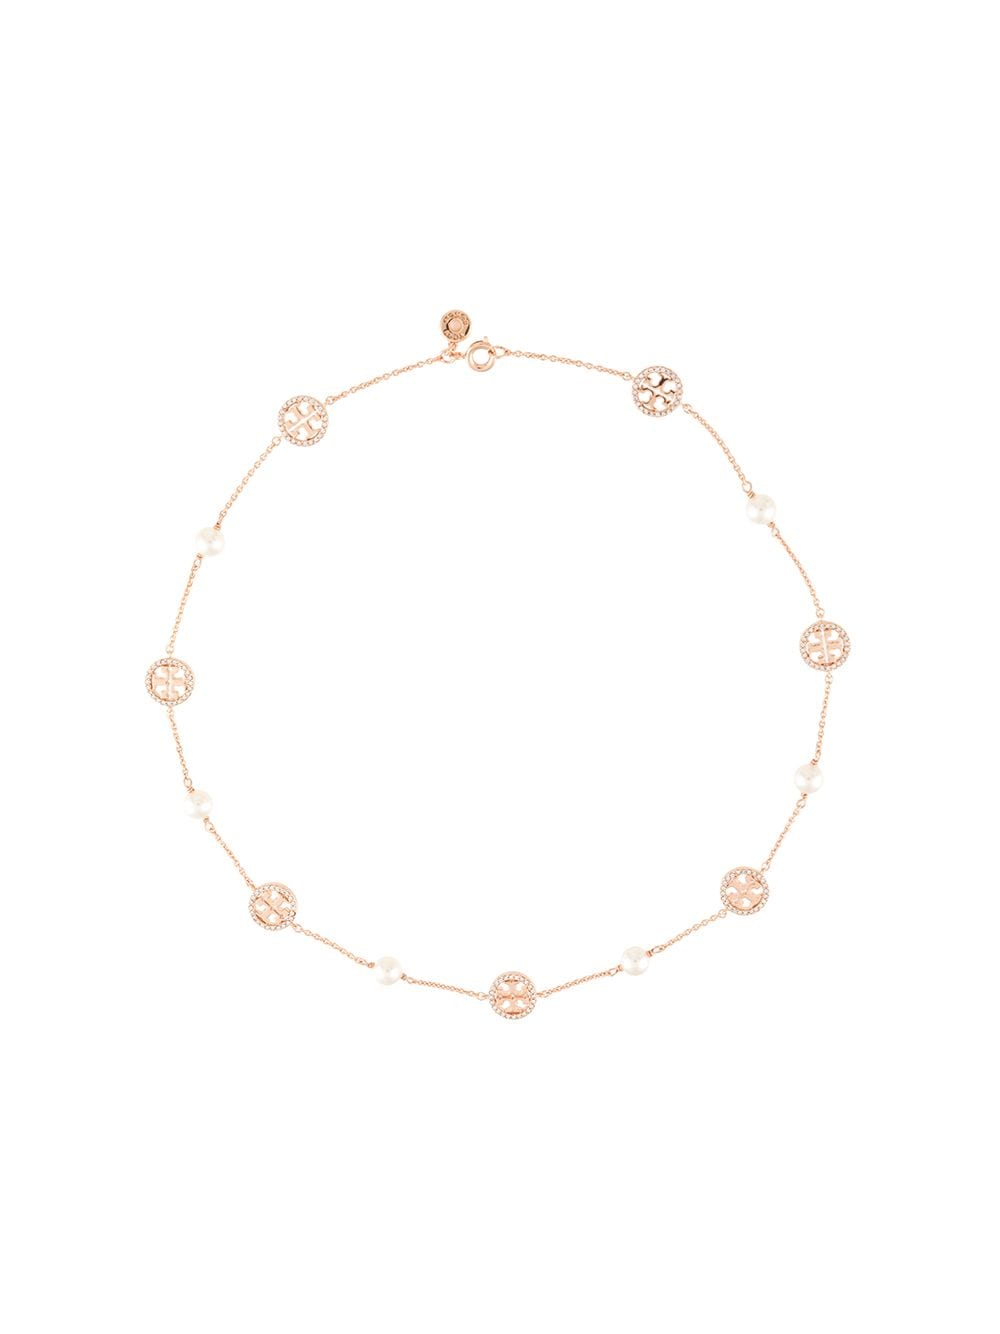 TORY BURCH CRYSTAL PEARL LOGO NECKLACE